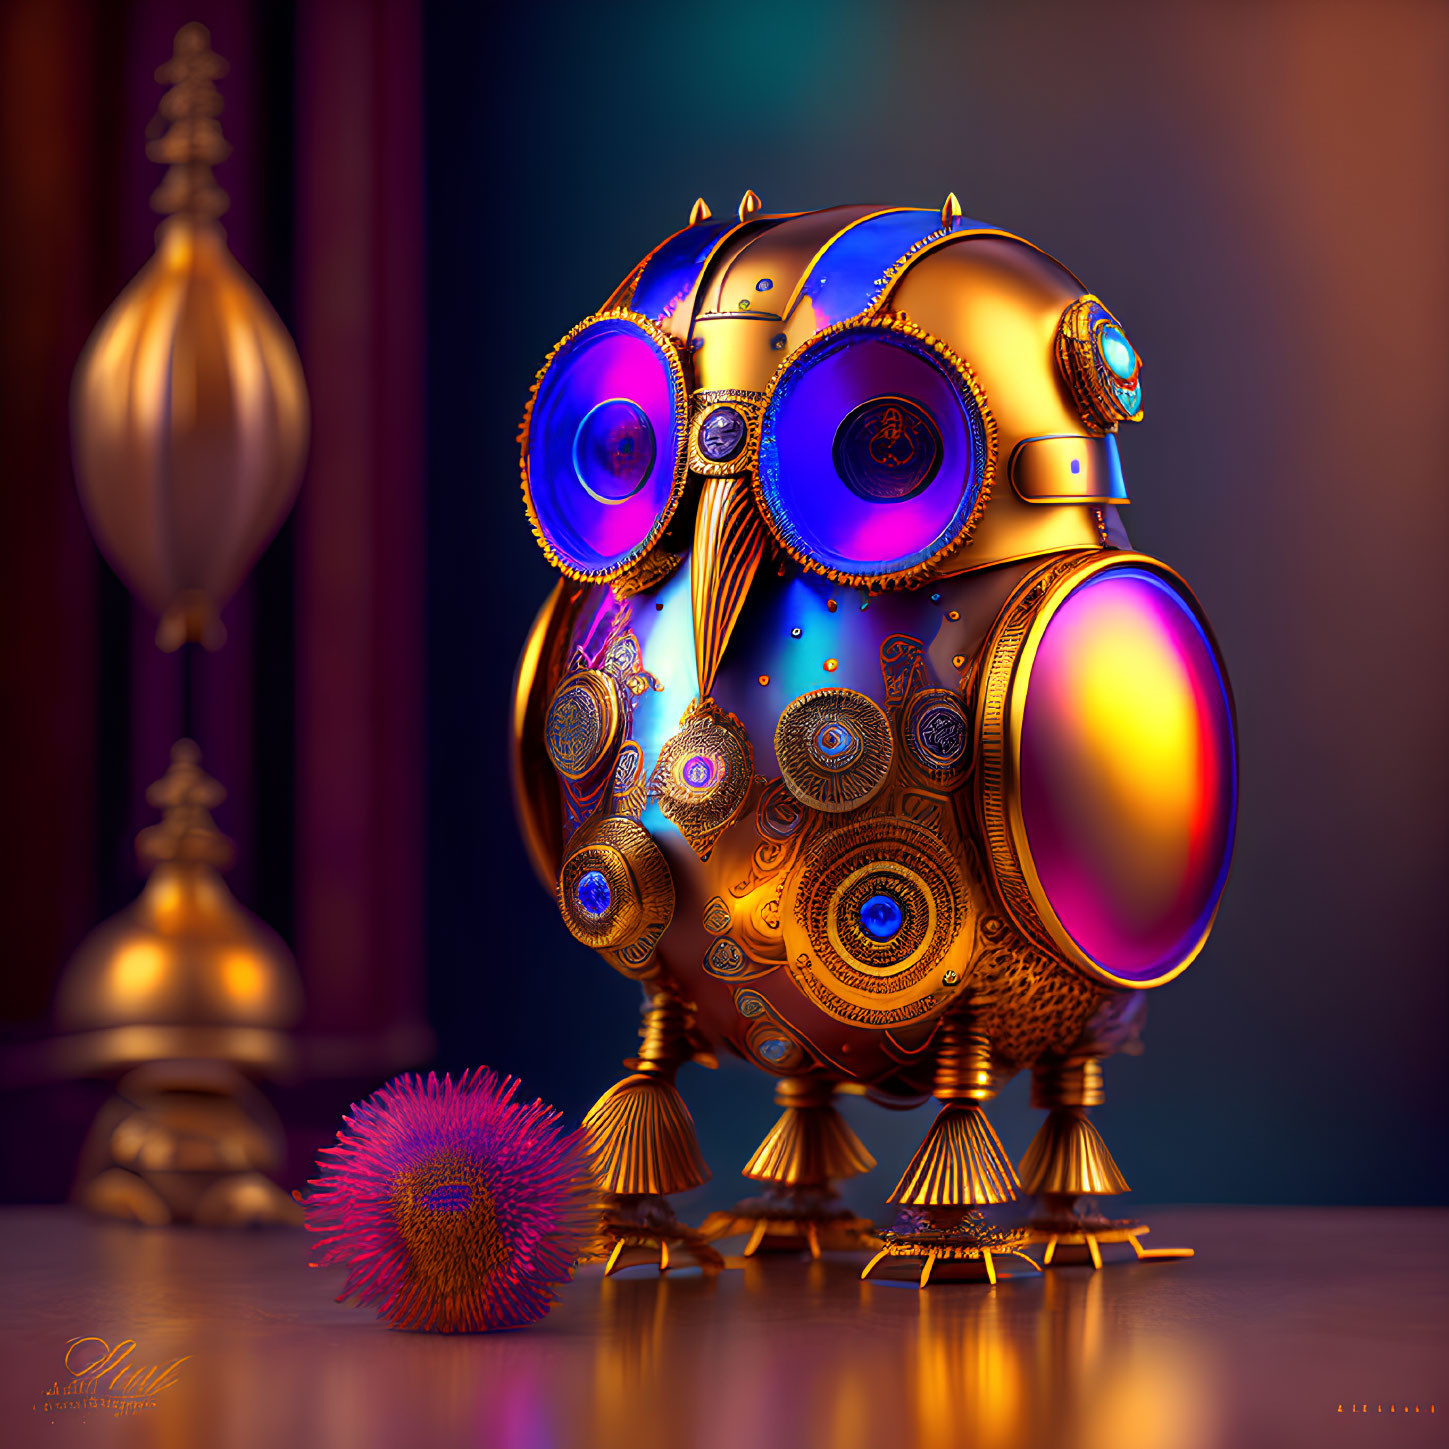 Steampunk-style spherical object with gears and metallic embellishments on moody backdrop.